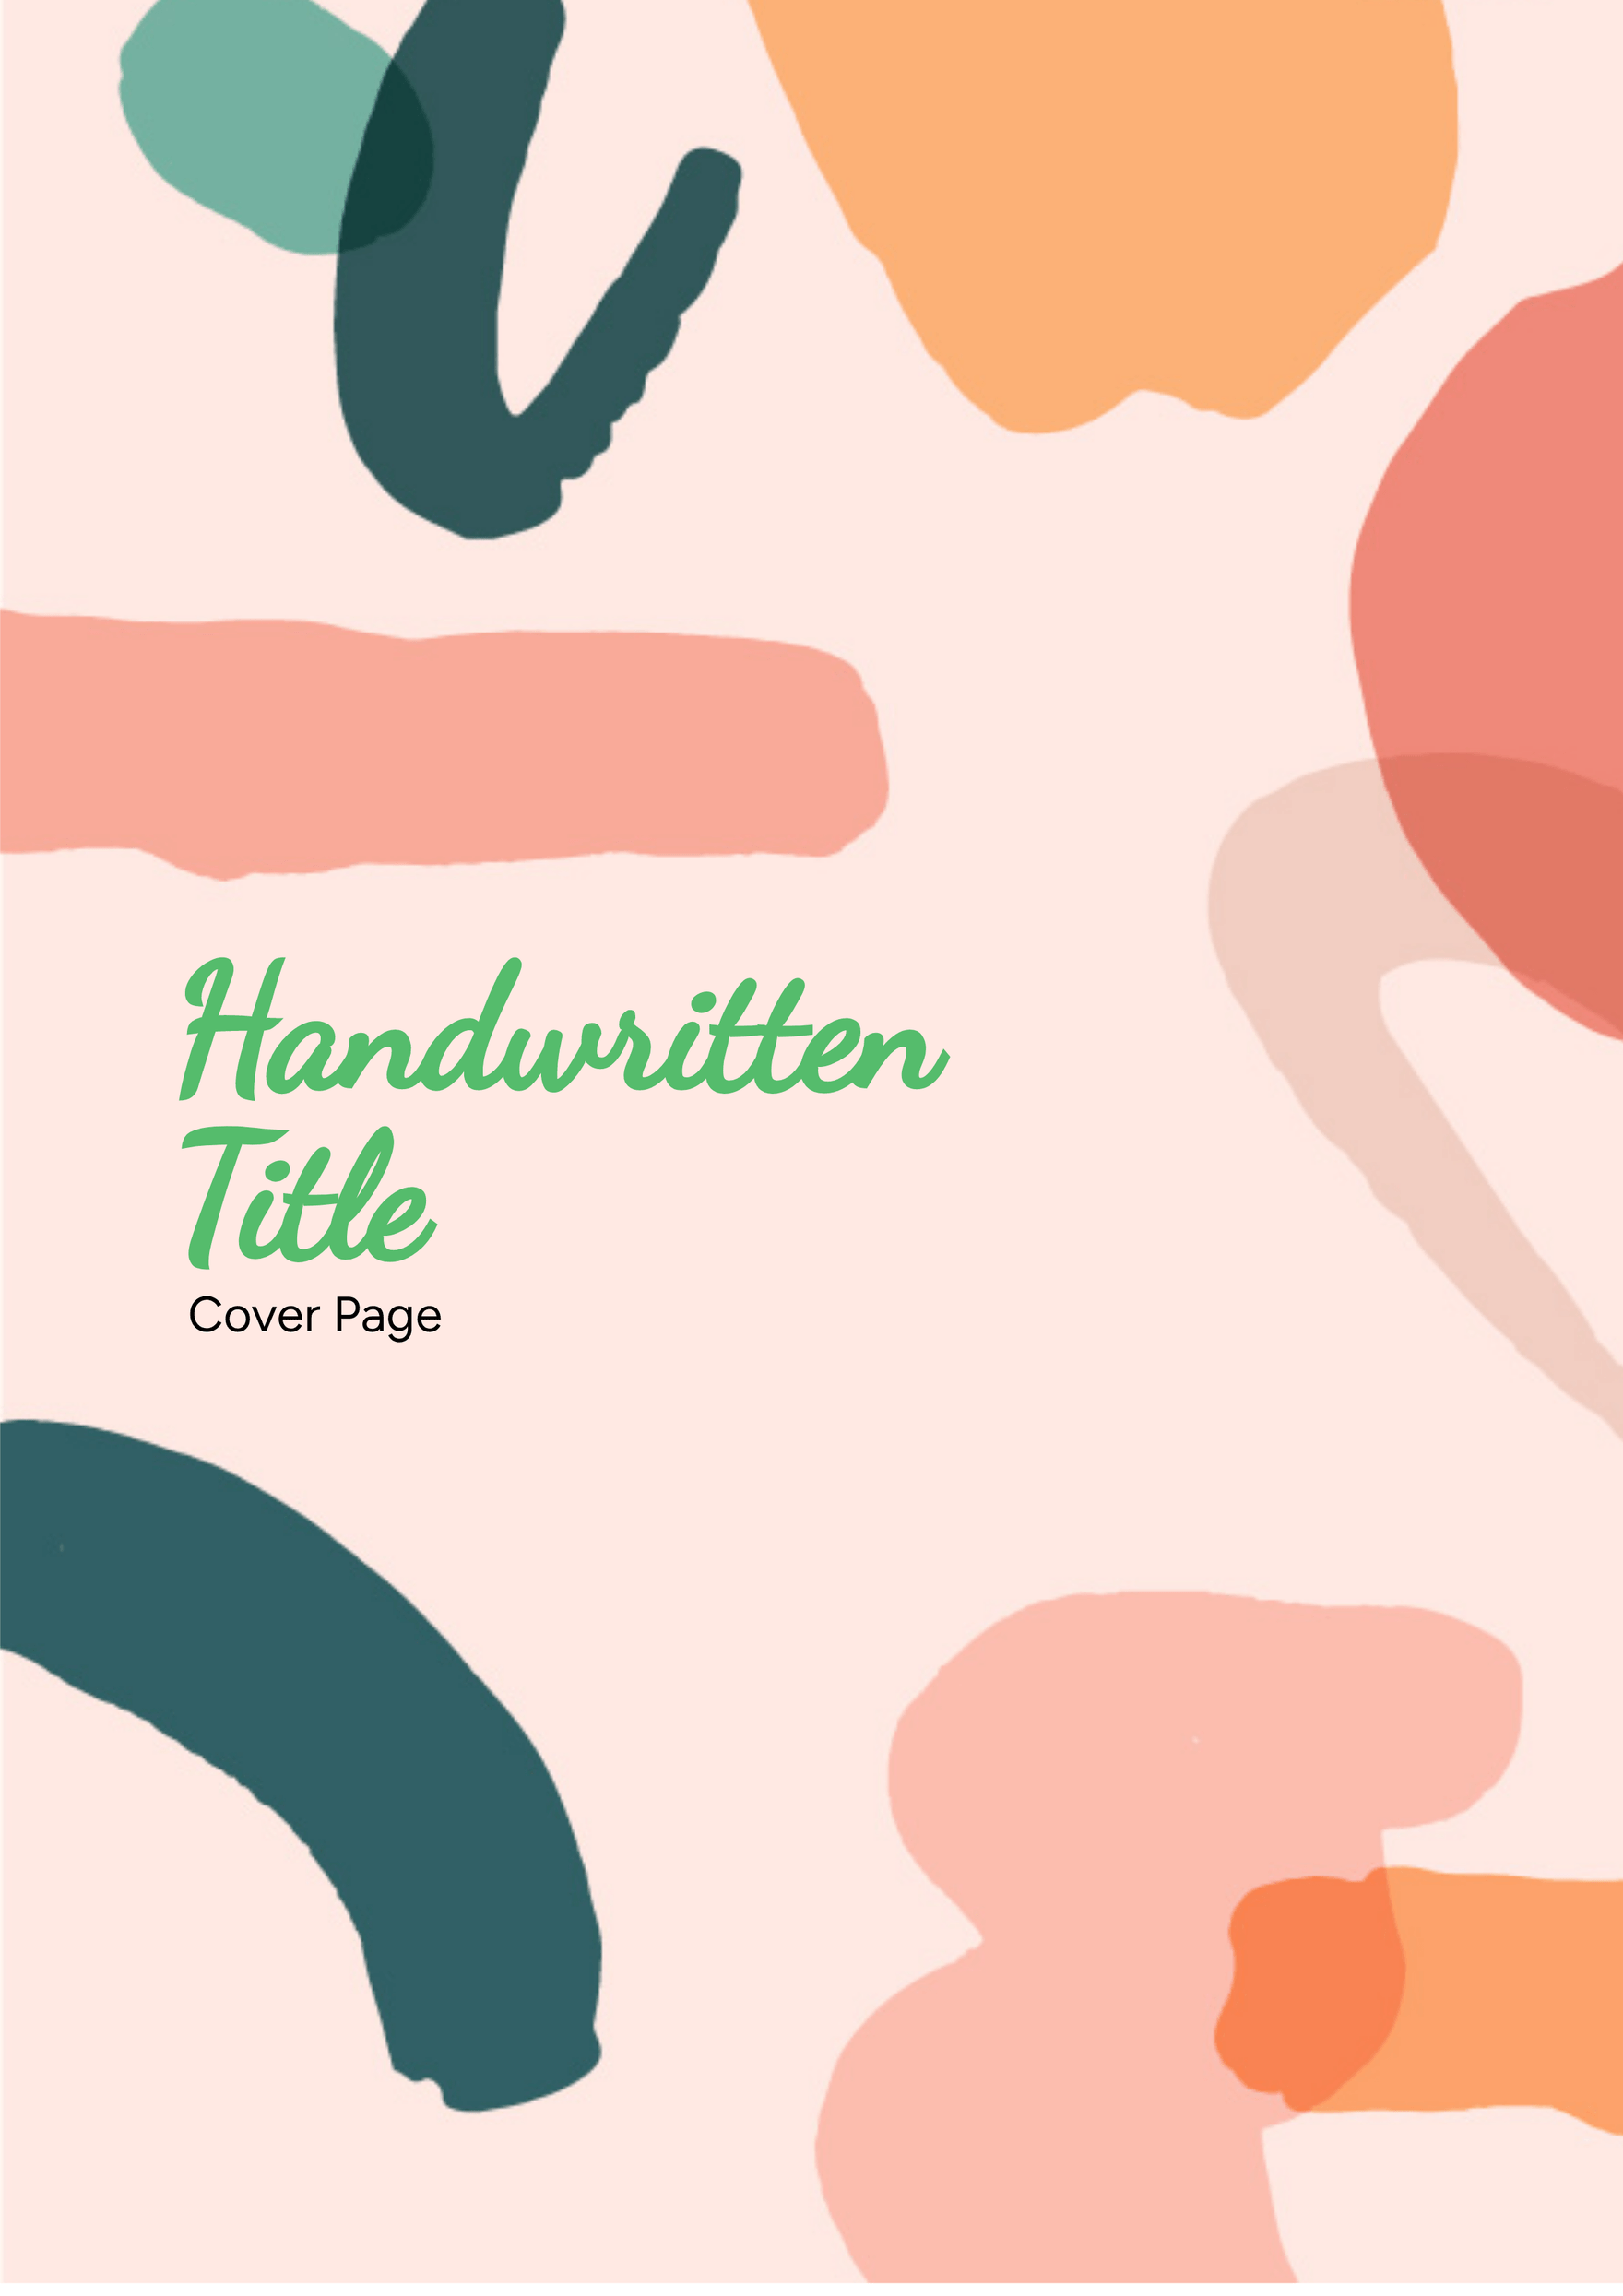 Handwritten Title Cover Page Template